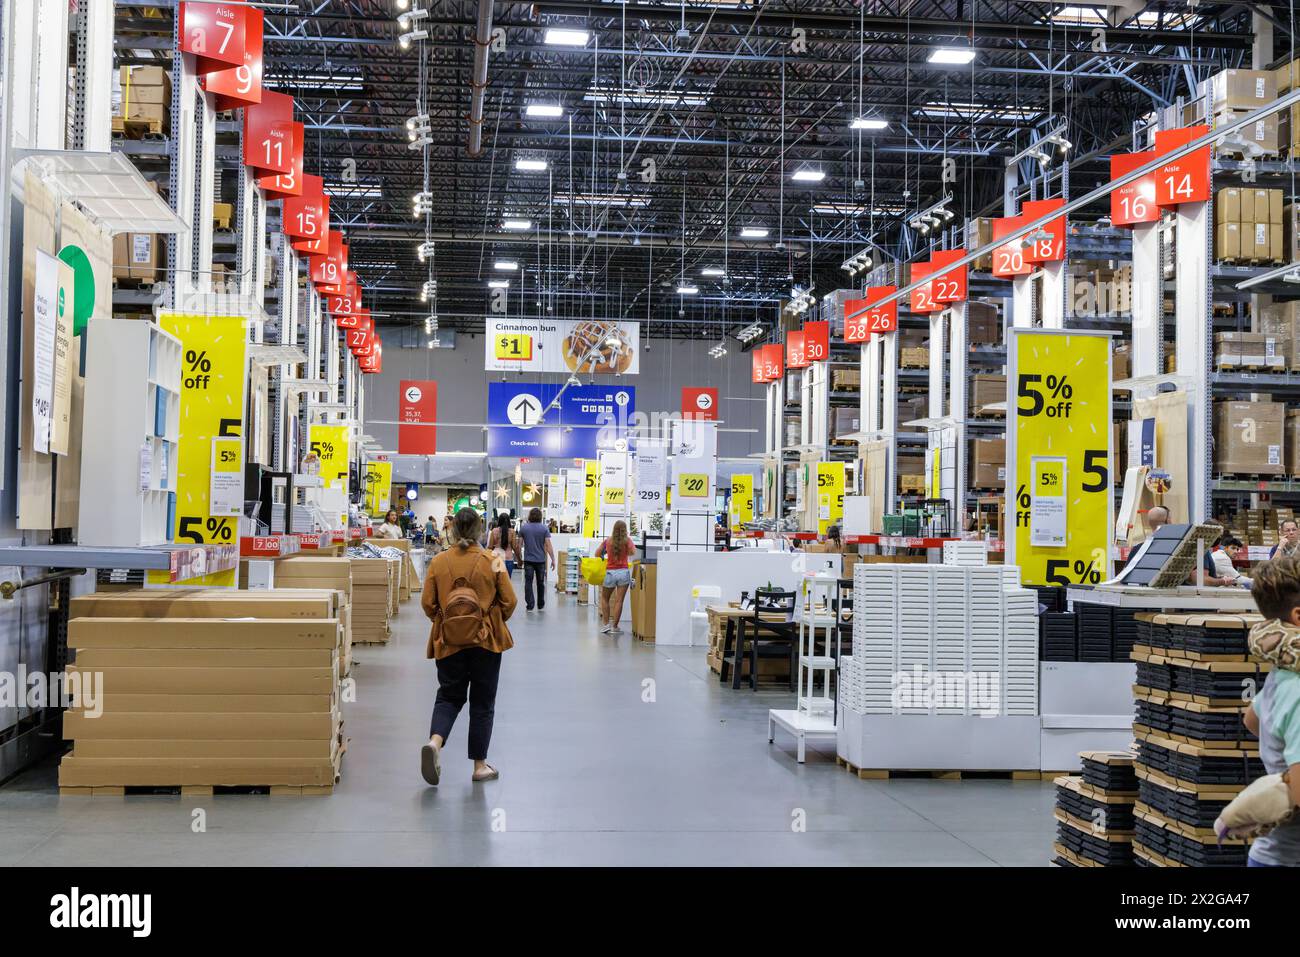 Customers shopping in the warehouse section of IKEA home store Stock Photo